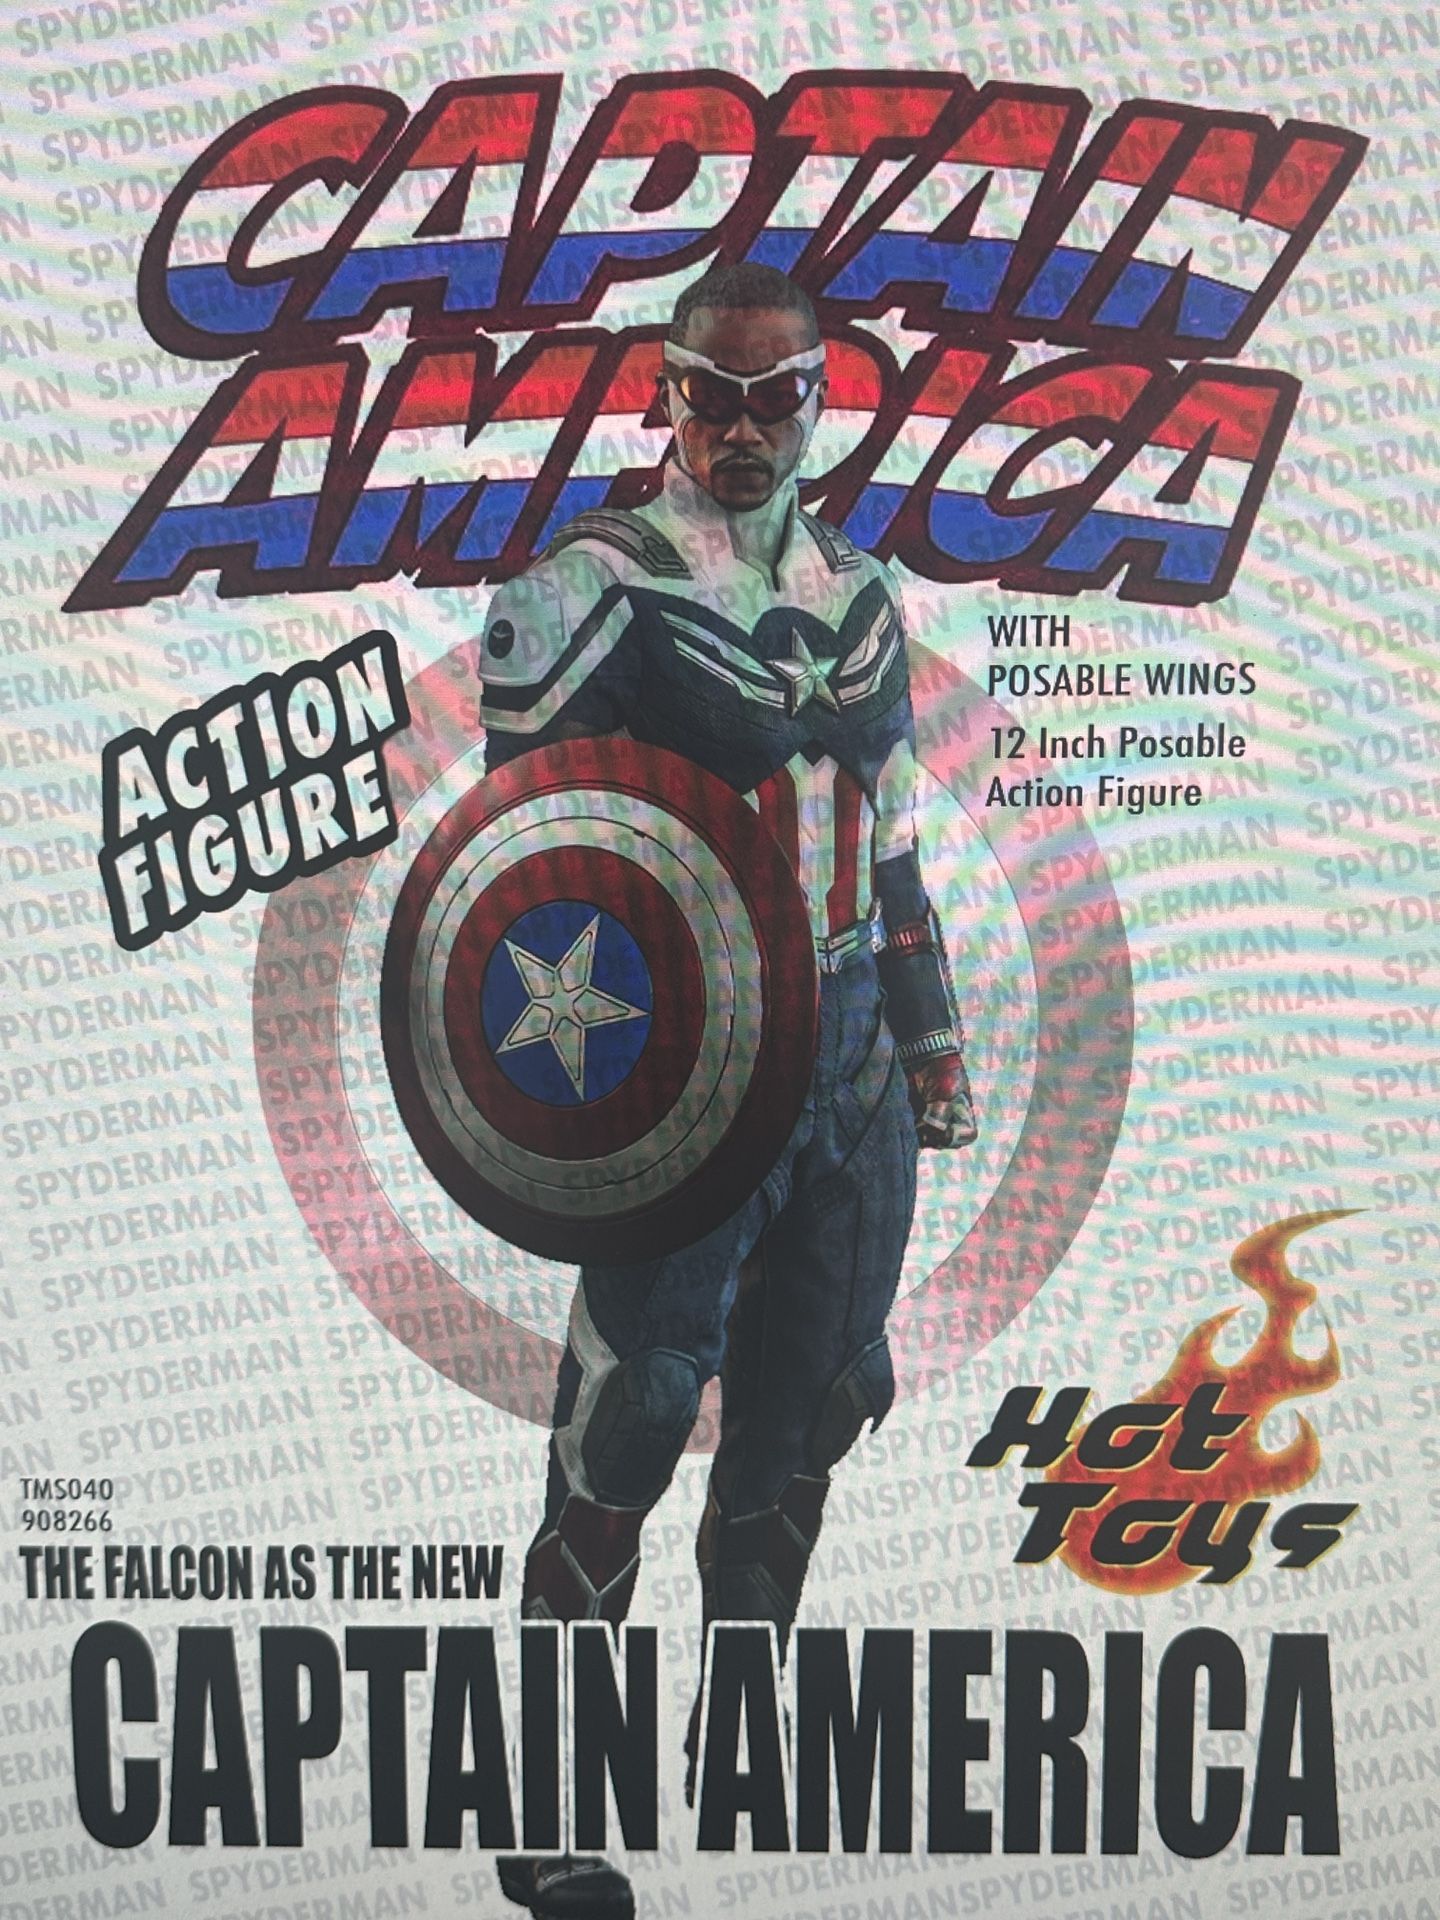 The Cal on As Captain America Hot Toys 1/6 Scale Figure. New In Box 